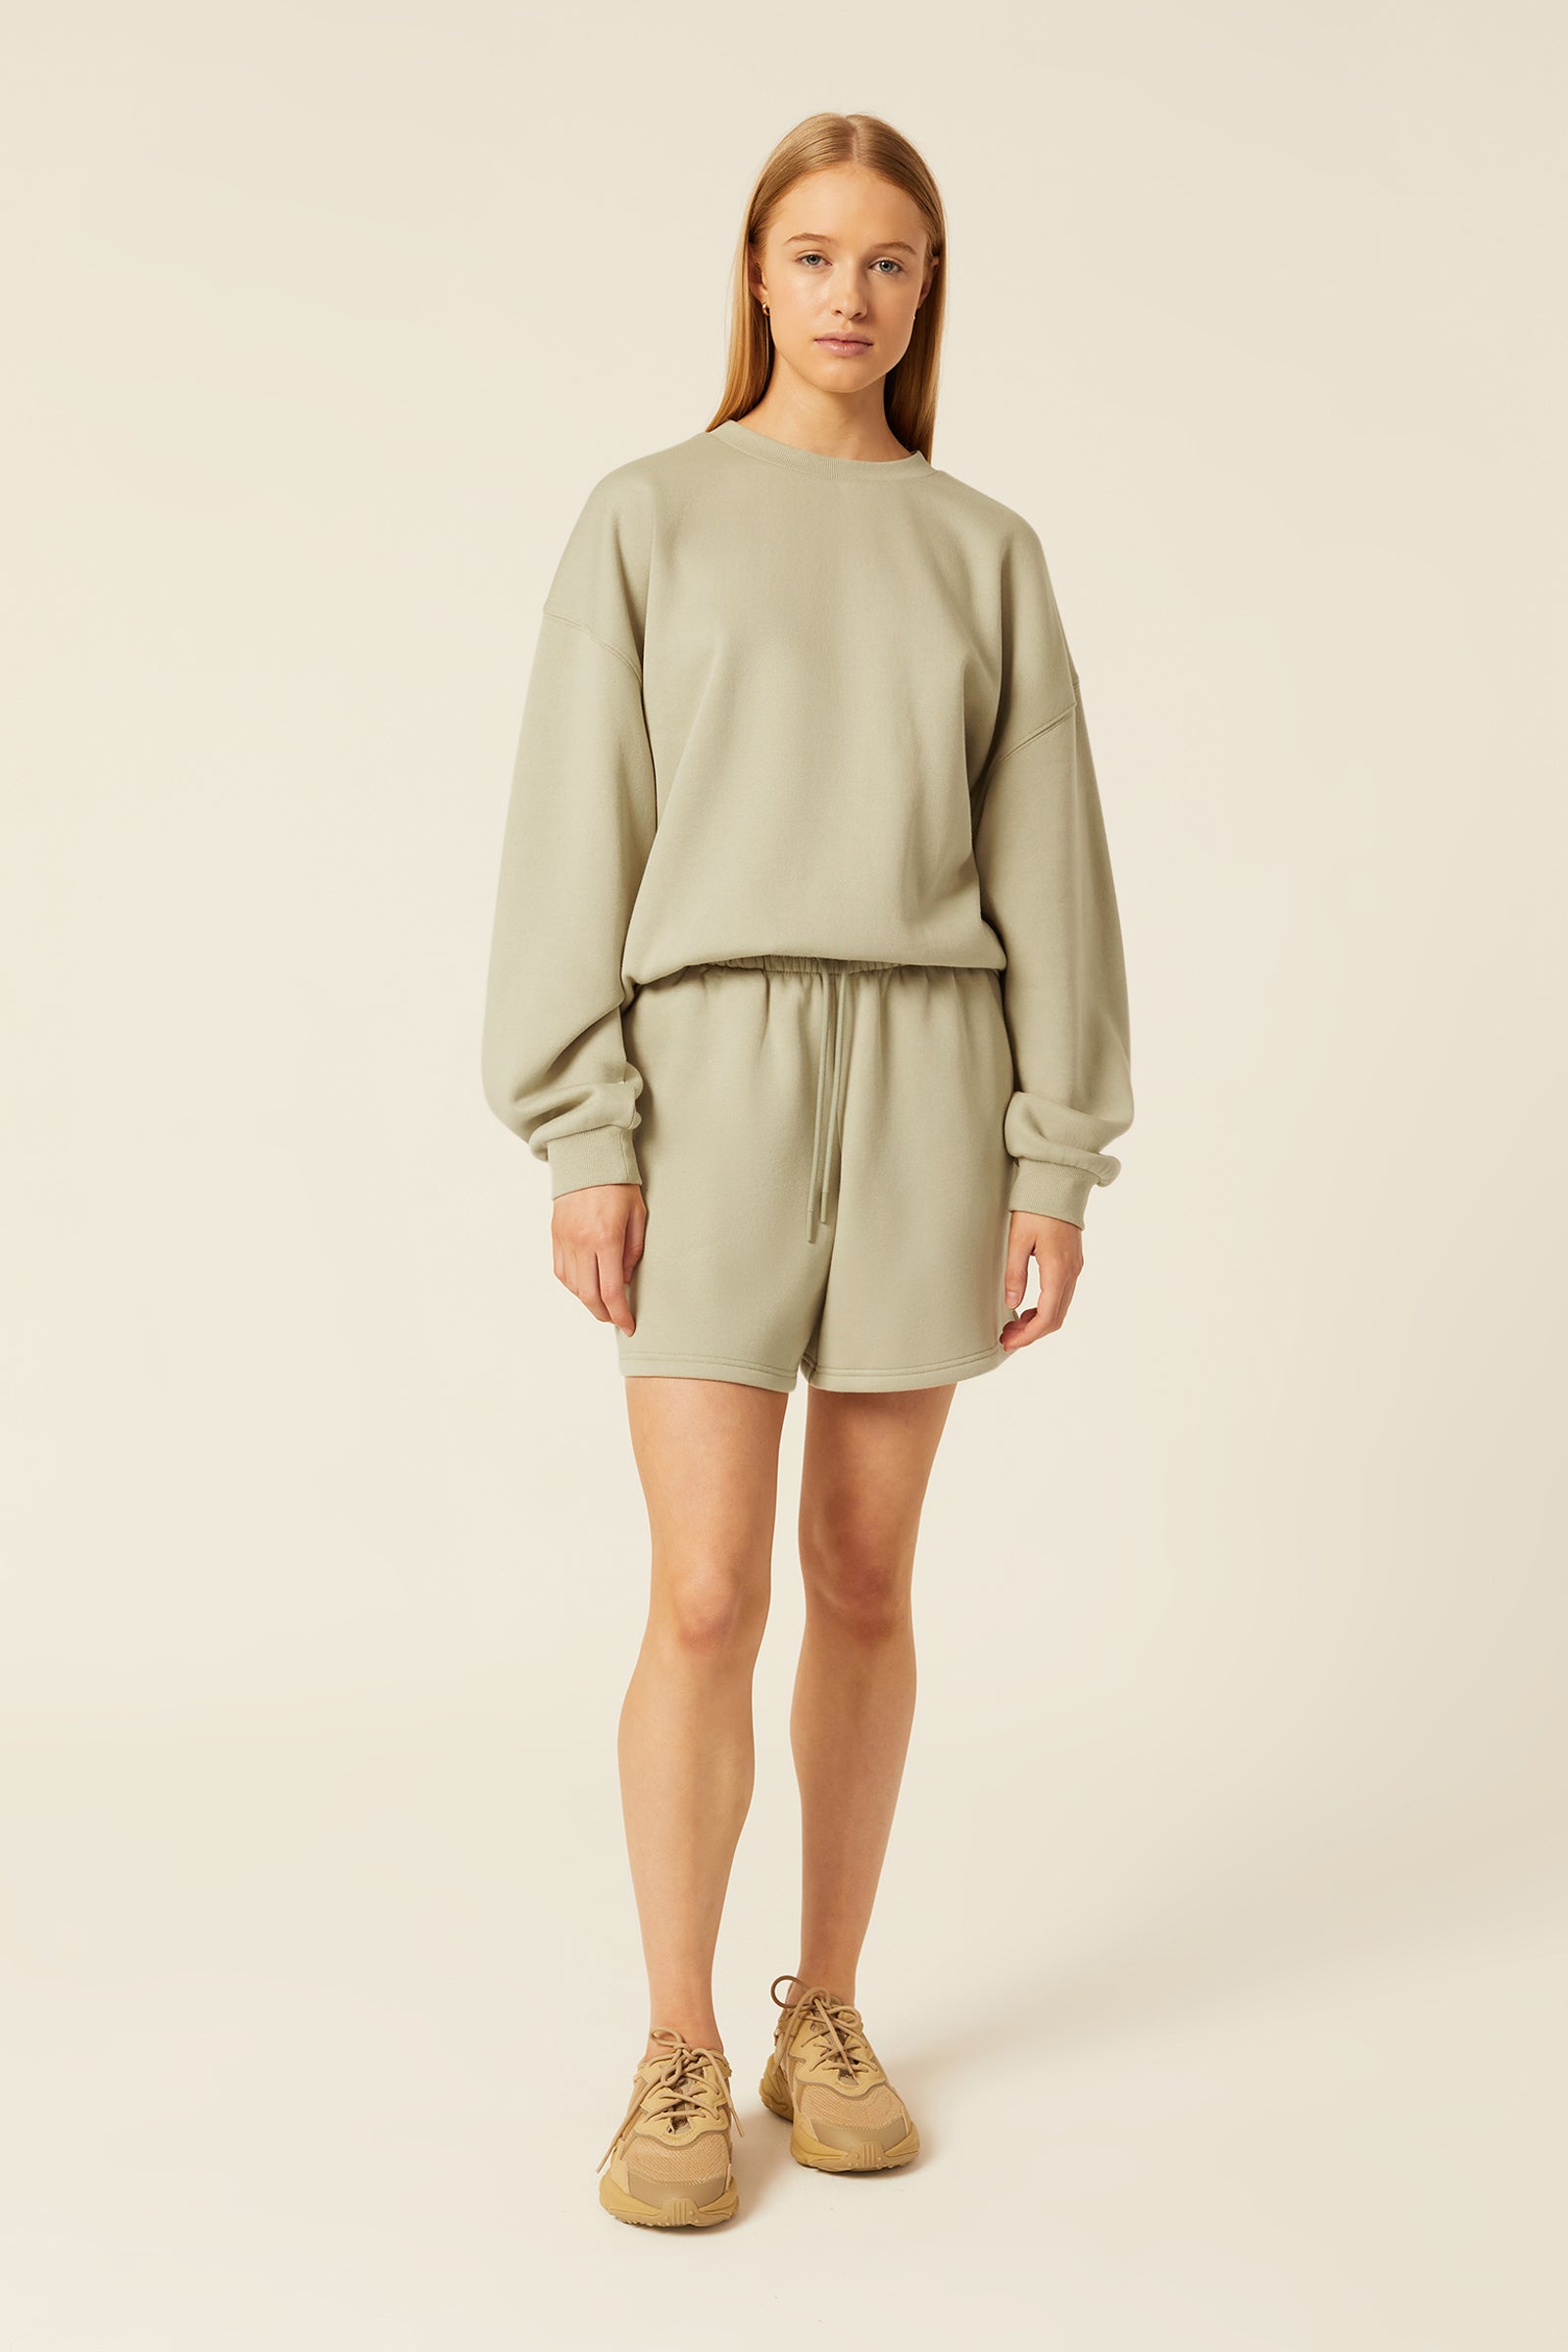 Nude Lucy Carter Curated Short In A Green Artichoke Colour 